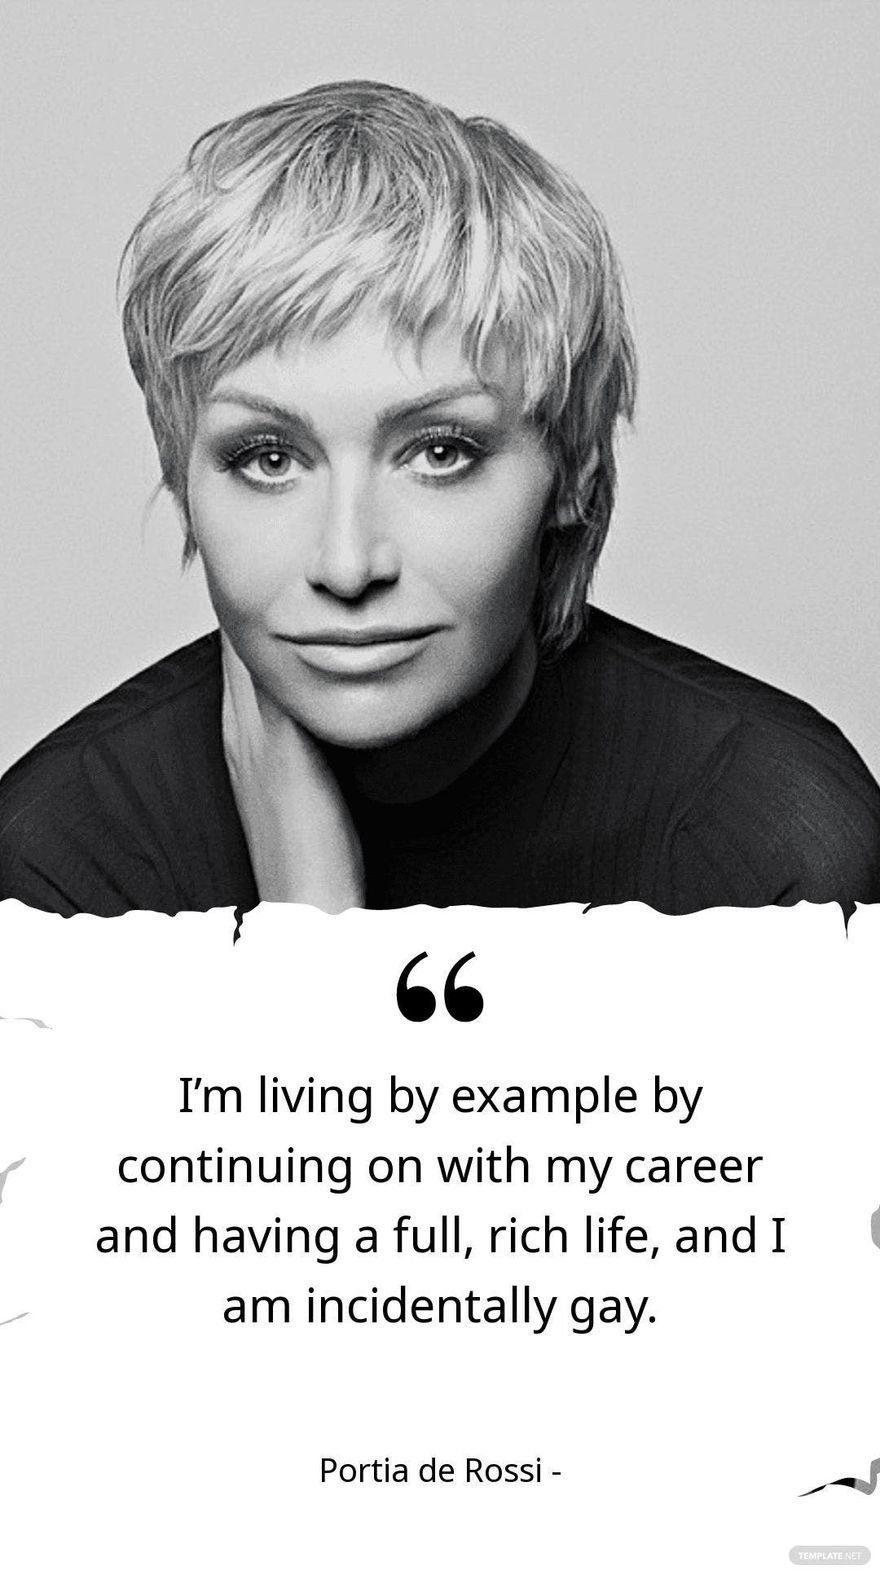 Free Portia de Rossi - I’m living by example by continuing on with my career and having a full, rich life, and I am incidentally gay. in JPG